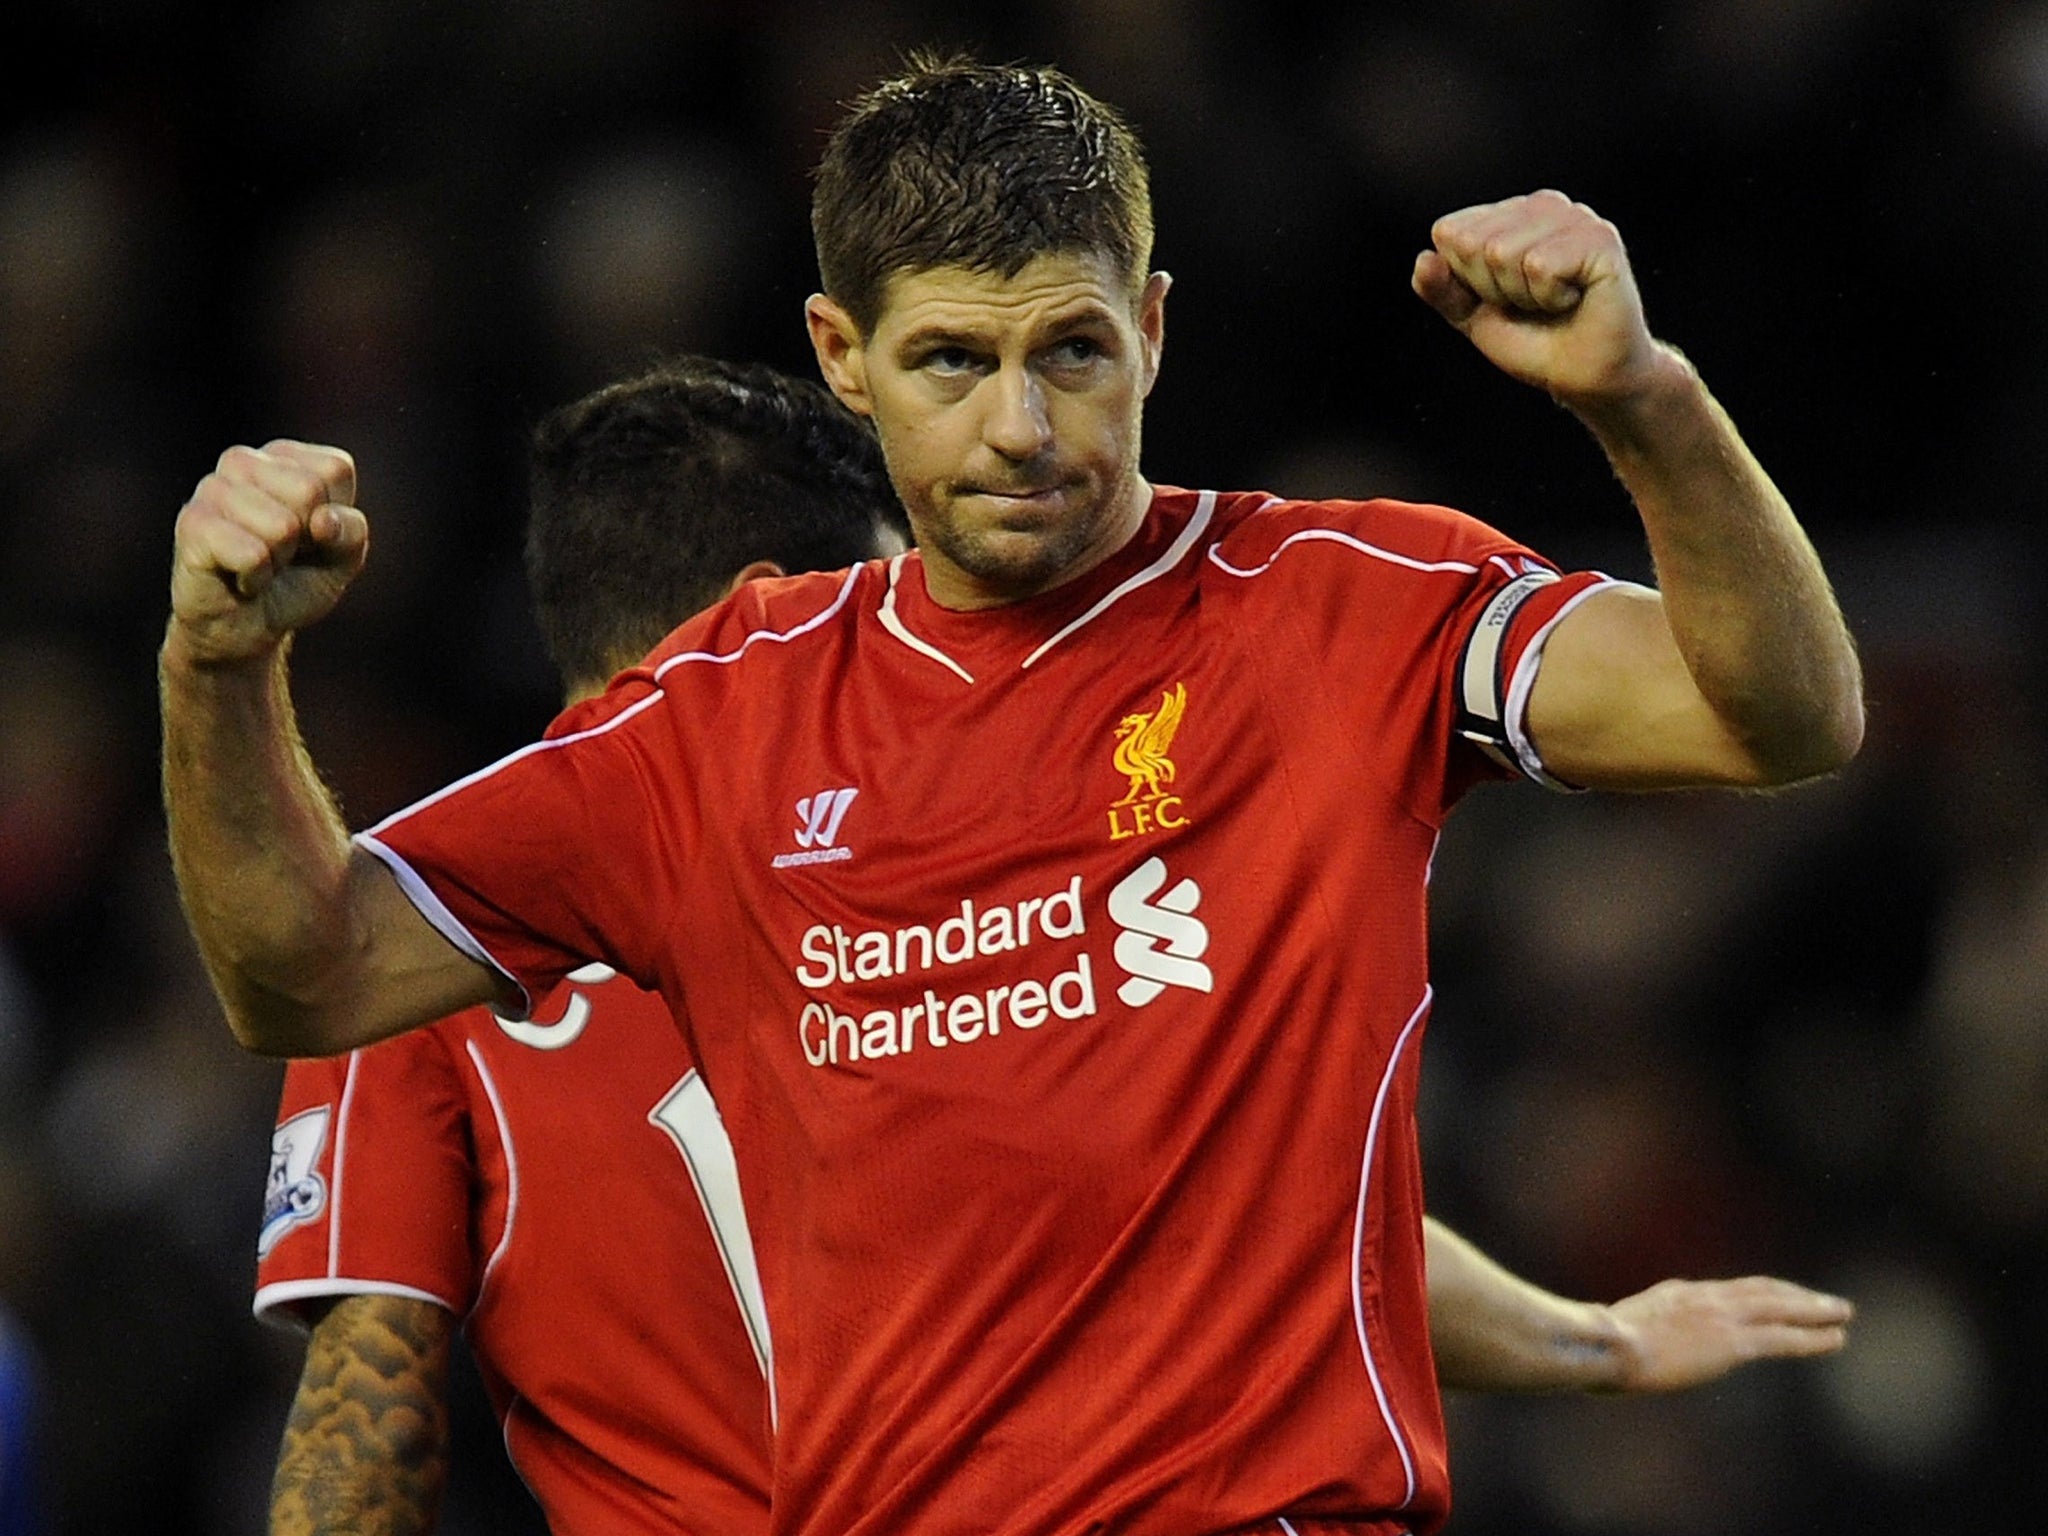 Steven Gerrard will receive £6m for his 18-month contract with the Los Angeles Galaxy